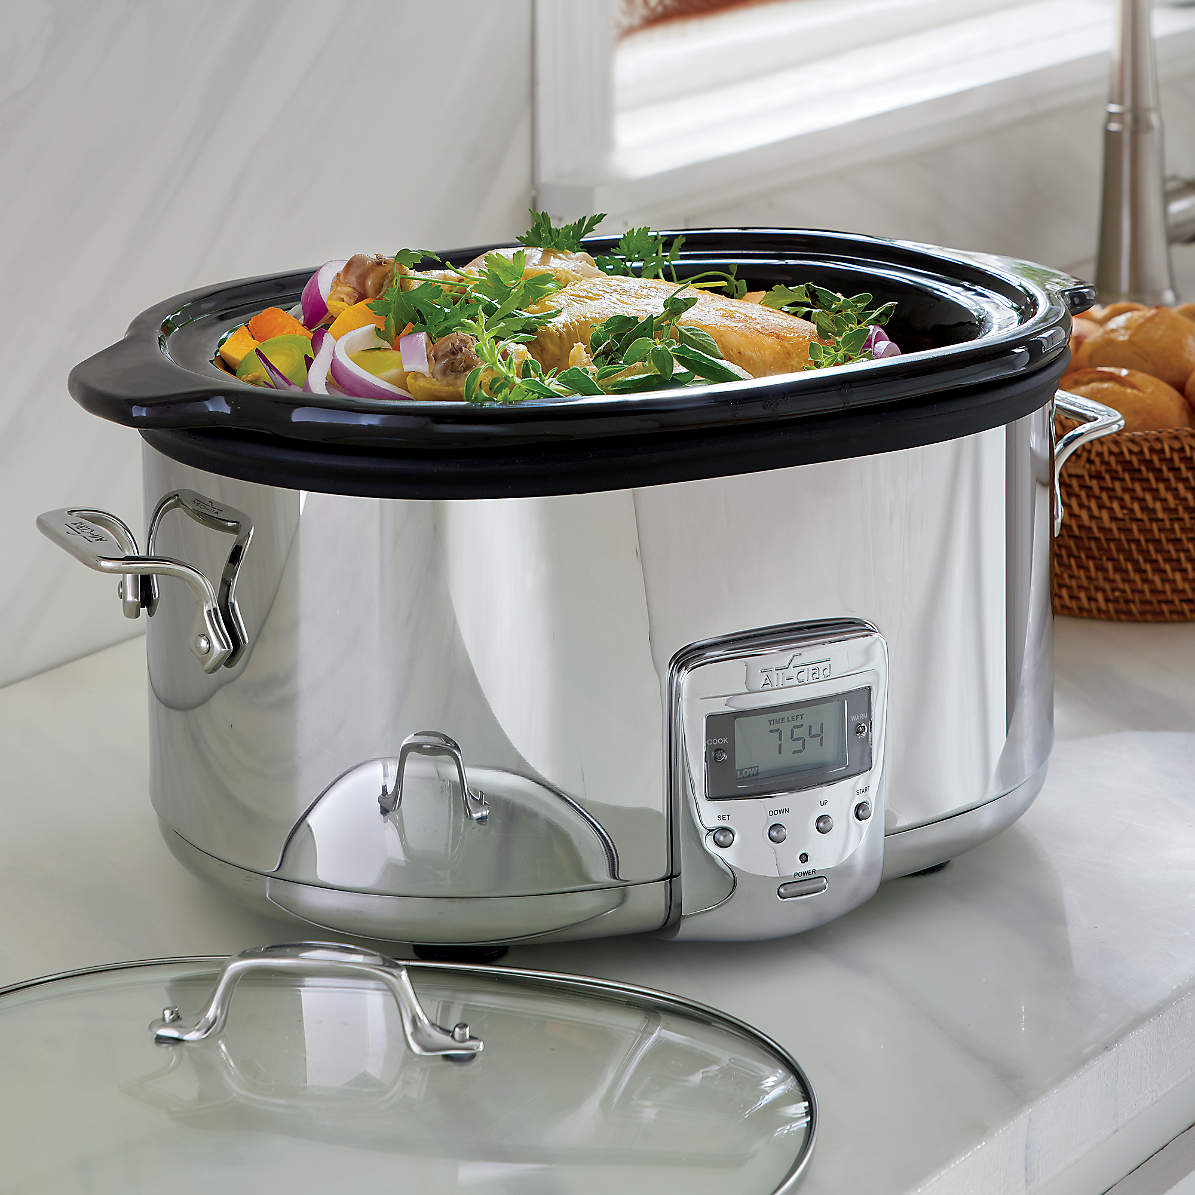 KitchenAid 6-Quart Stainless Steel Oval Slow Cooker at